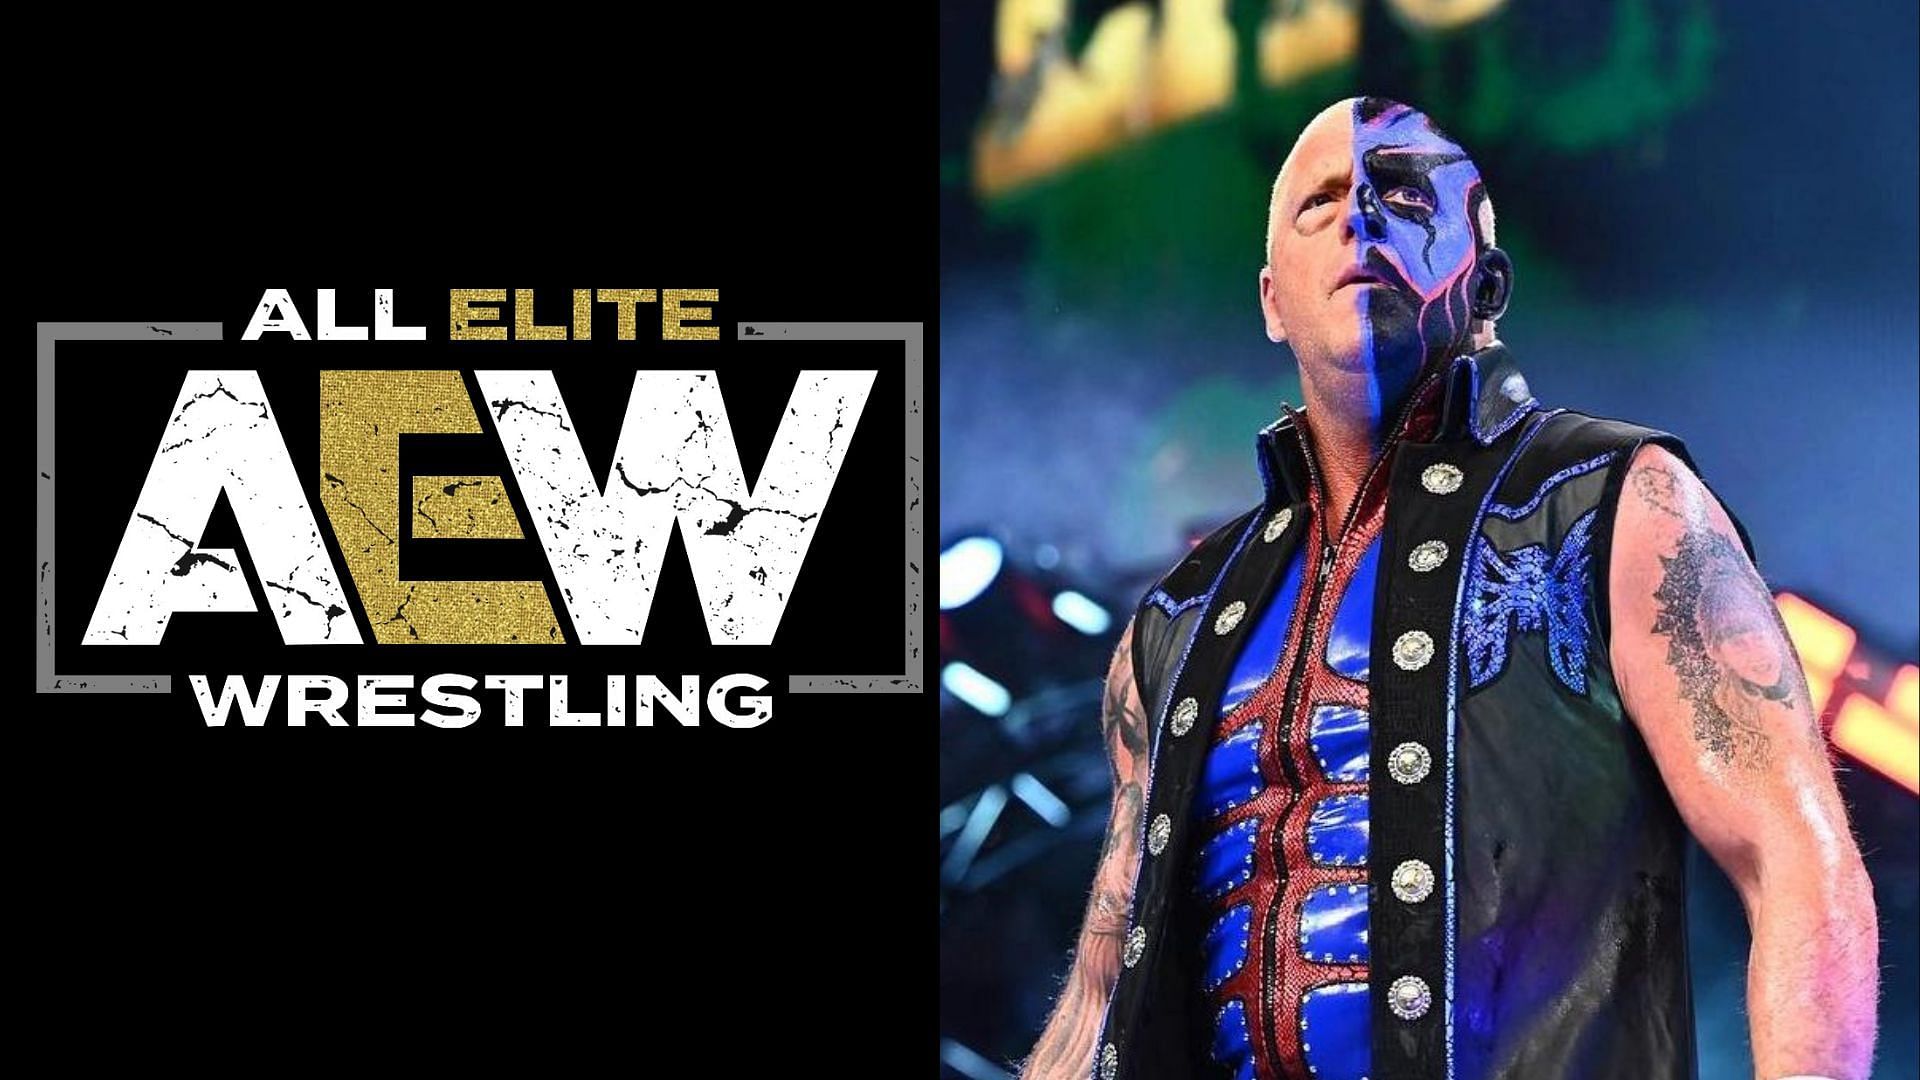 Dustin Rhodes had some interesting things to say this week